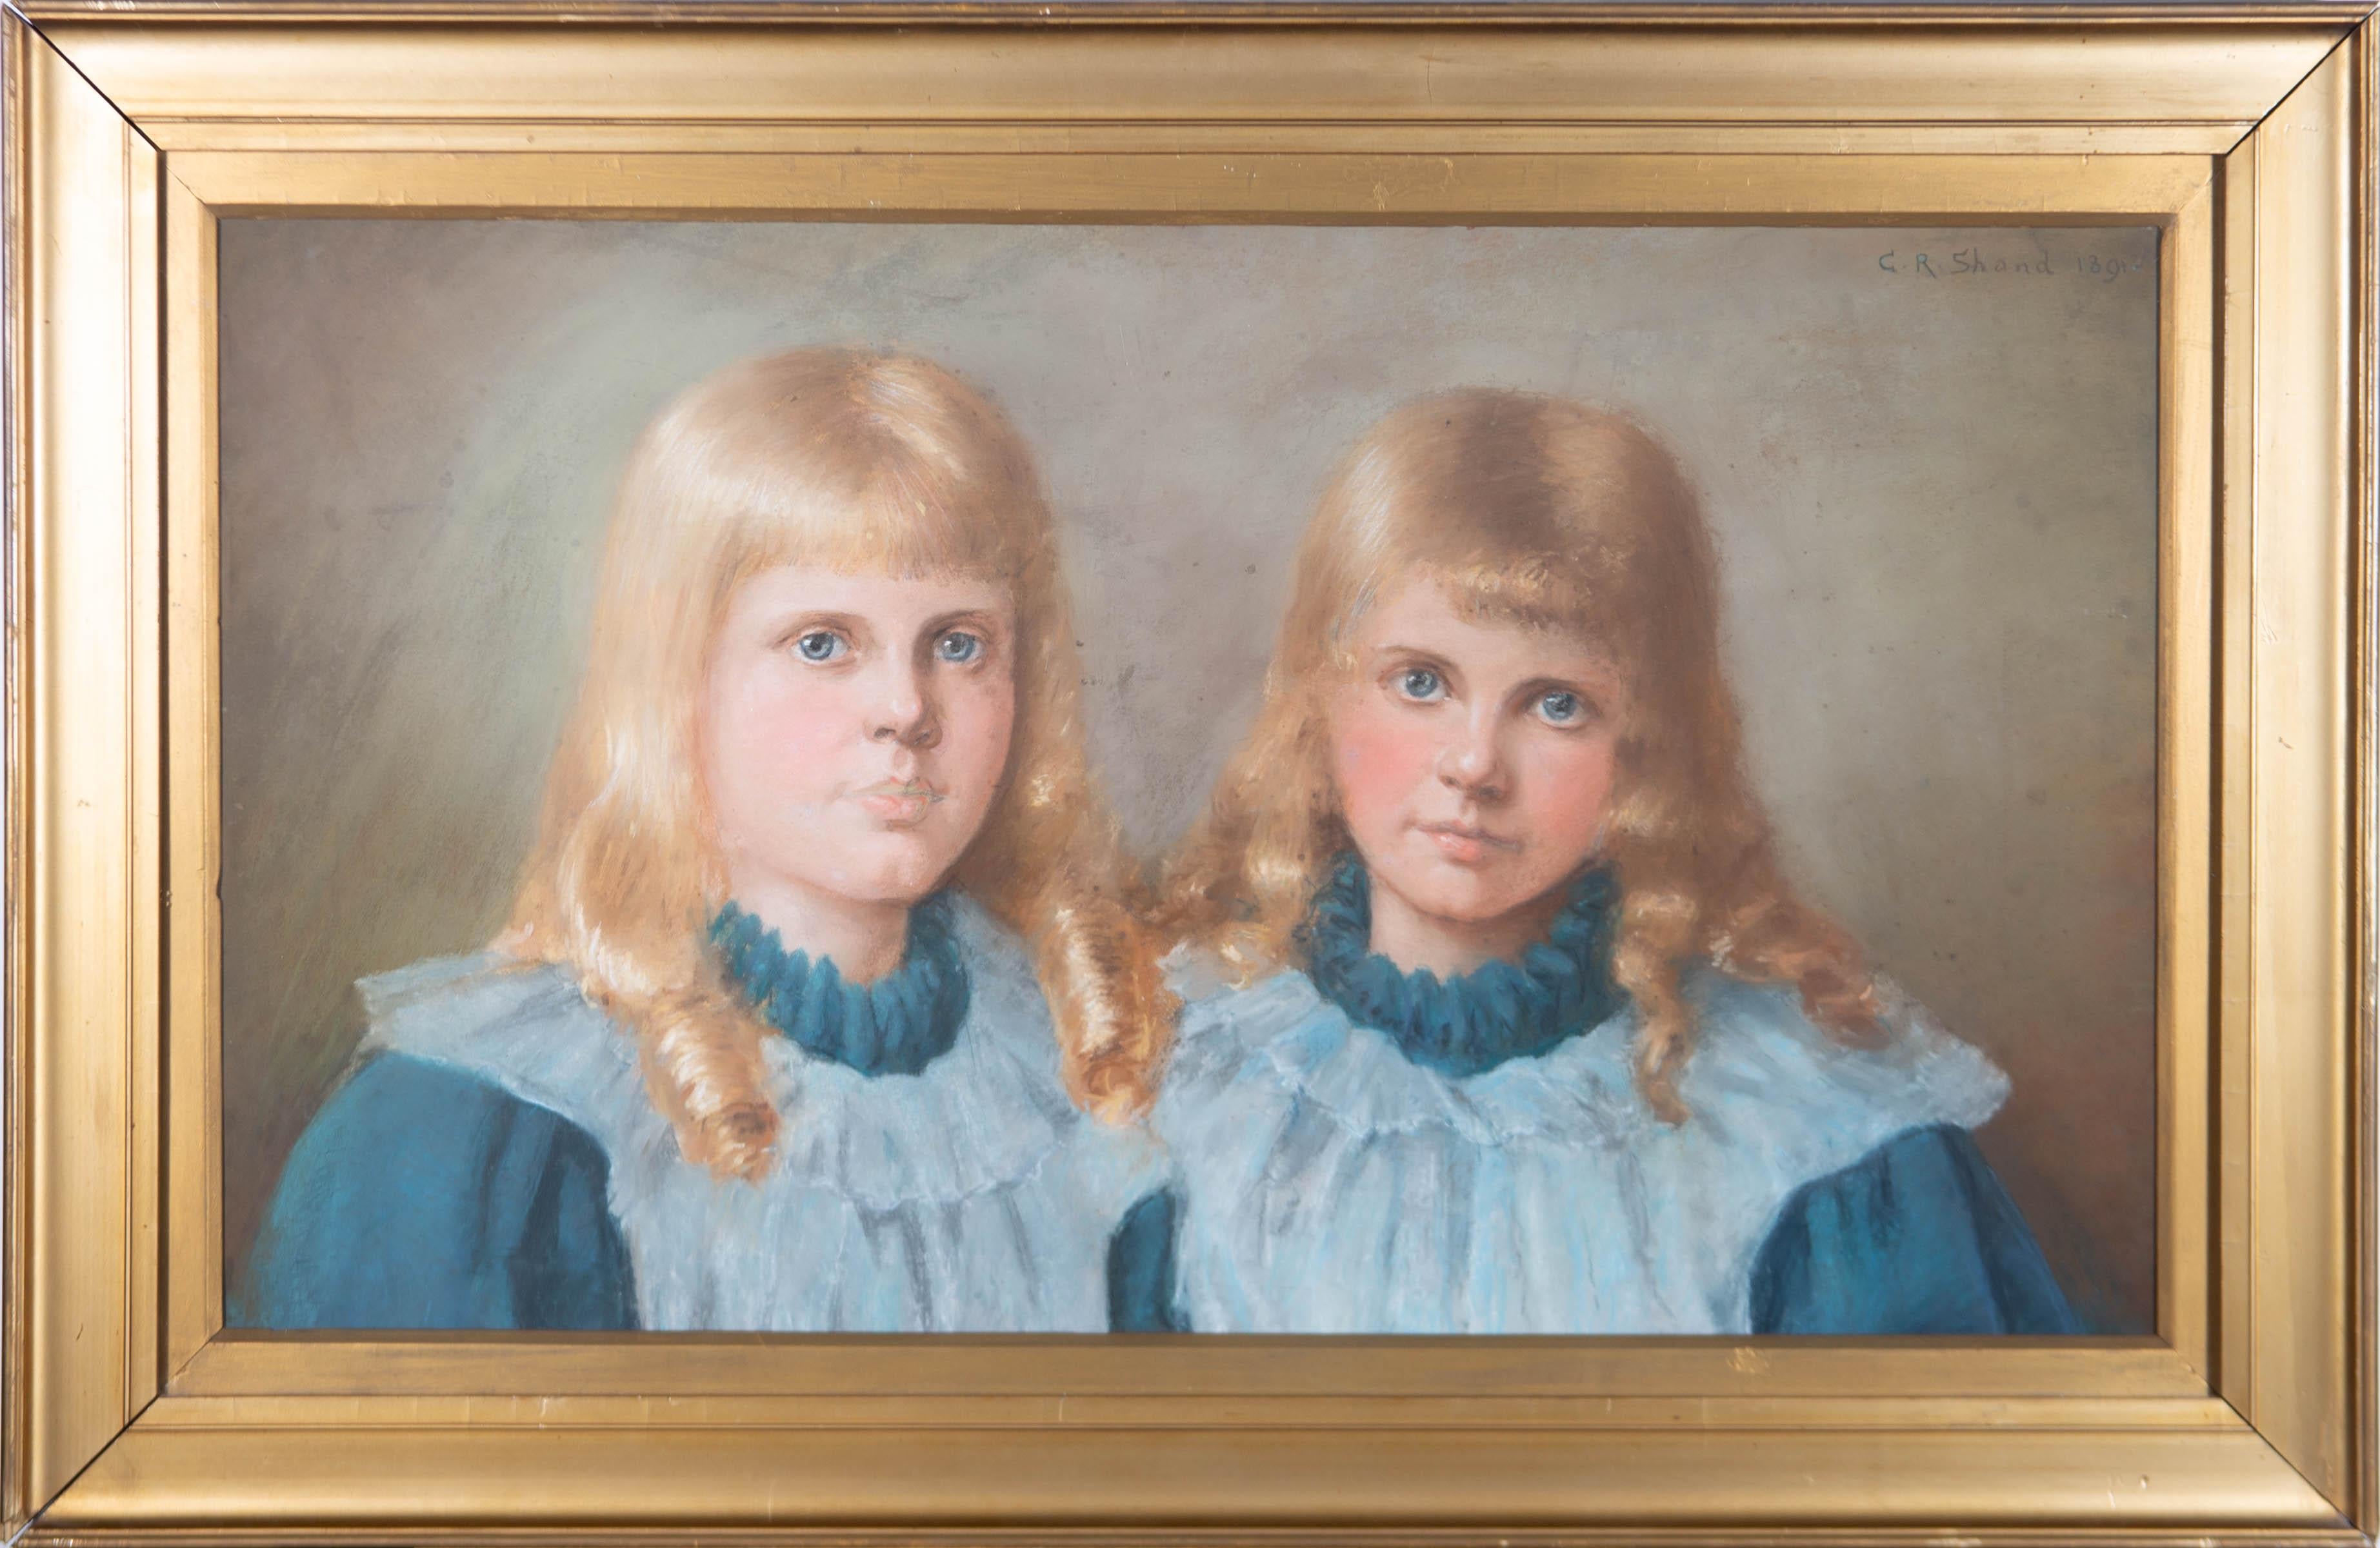 Pastels are used to render a fine portrait of two twin girls in matching blue frocks.

A remarkable portrait of two twin girls.

Signed and dated.

On wove.